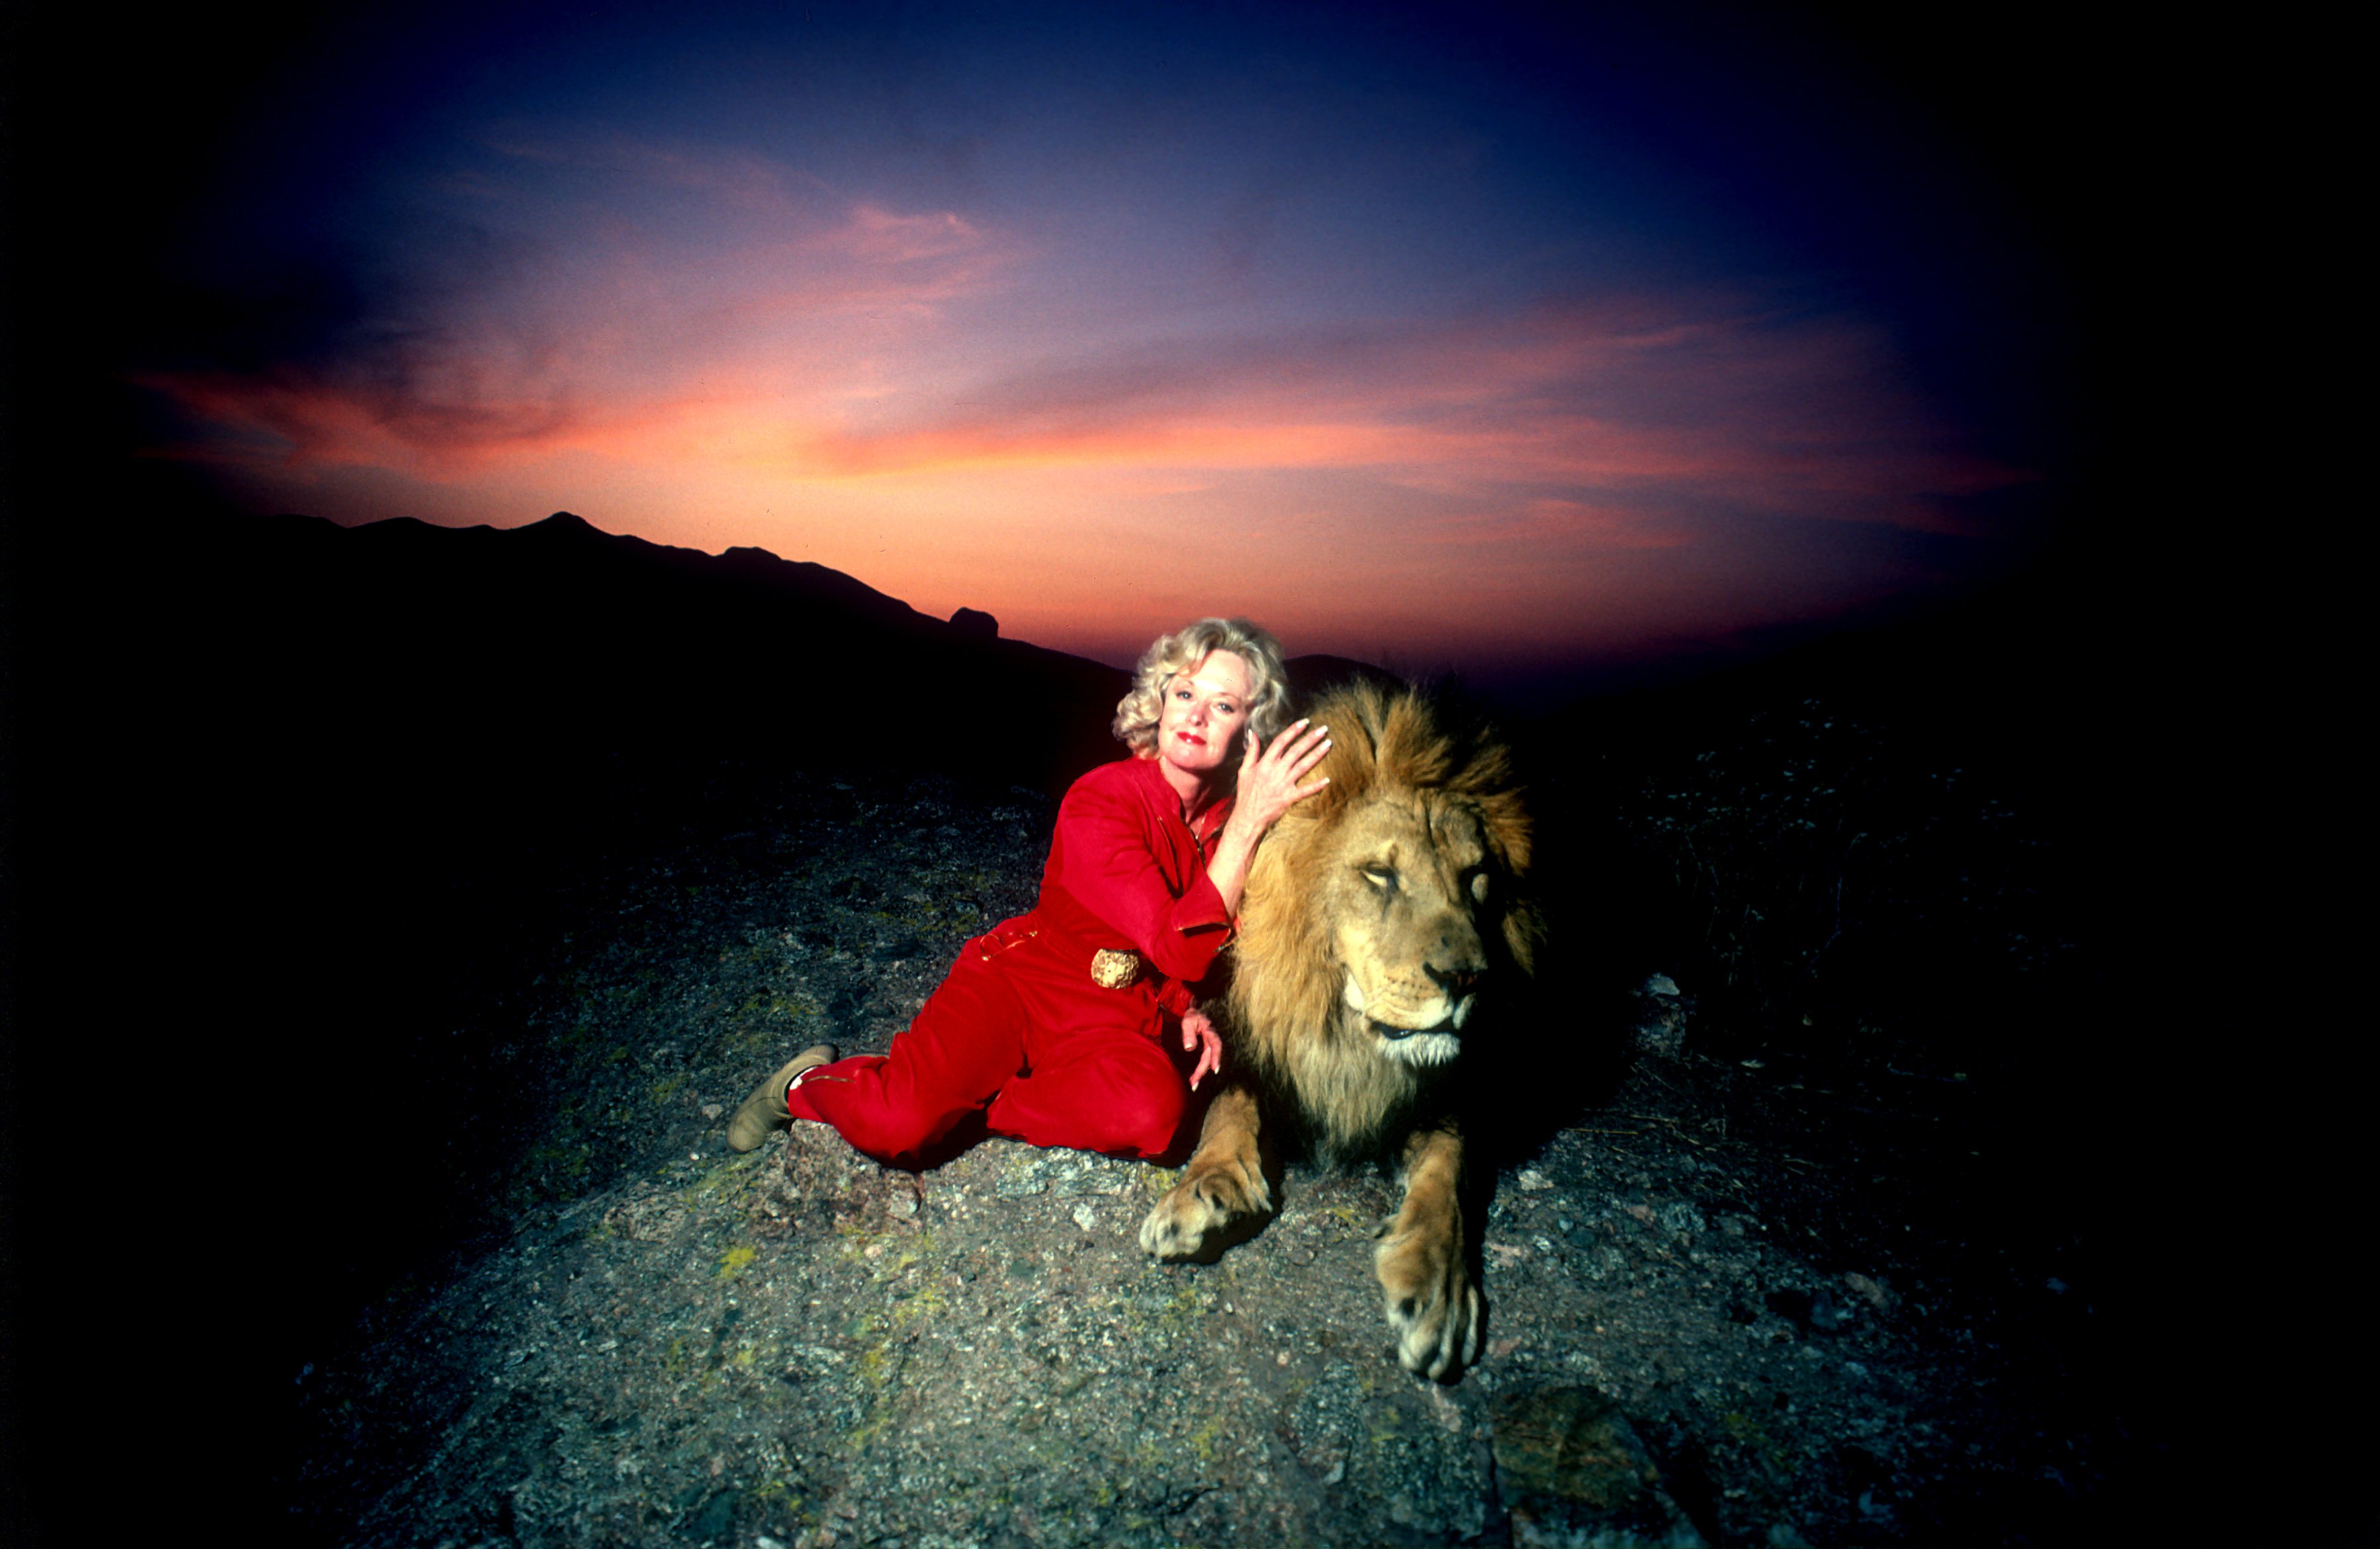 Actress Tipi Hedren, mother of Melanie Griffiths stands on a hill overlooking her Saugus Animal reserve with a full grown male lion. November 16, 1983  | Photo: Getty Images